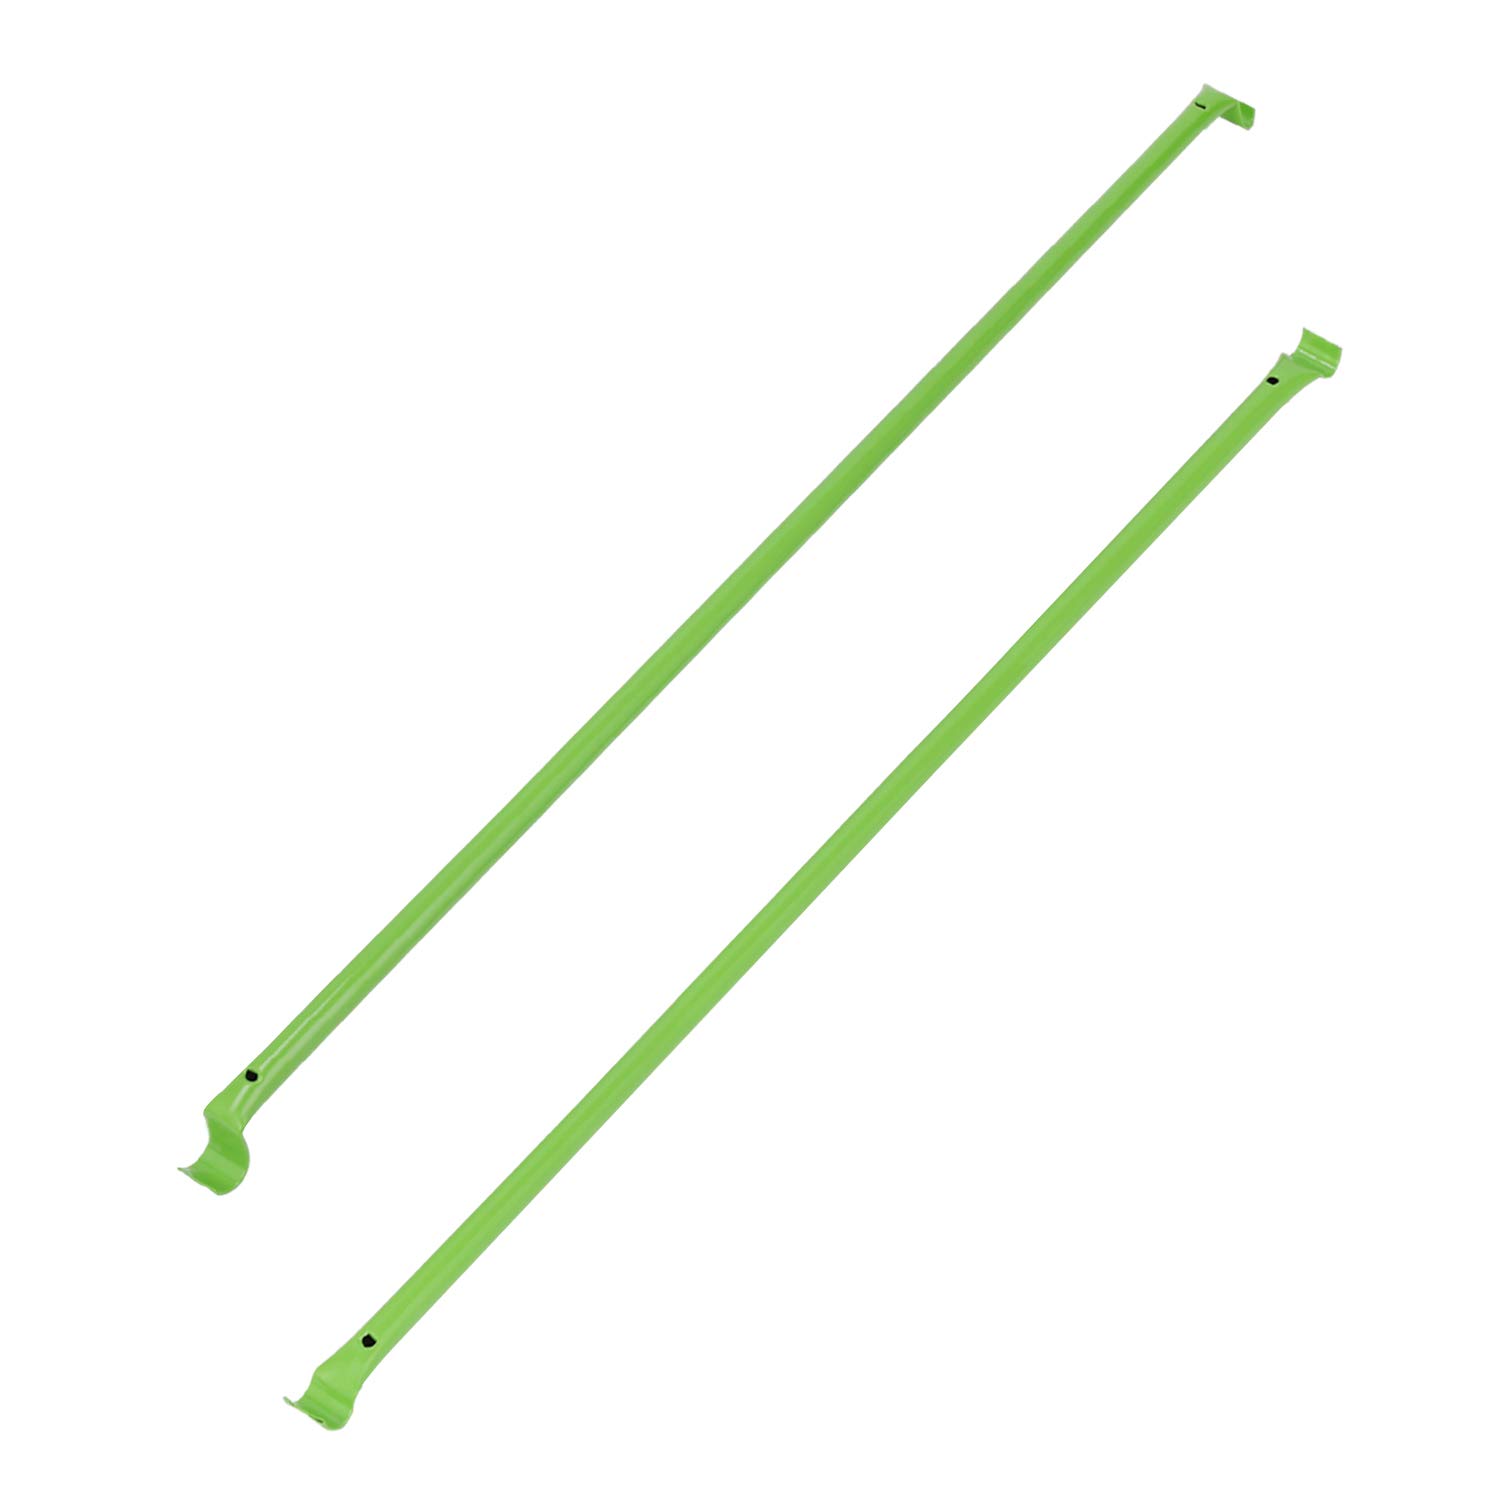 Vivosun Grow Tent Support Pole, Hanging Bar For 5 By 5 Tent